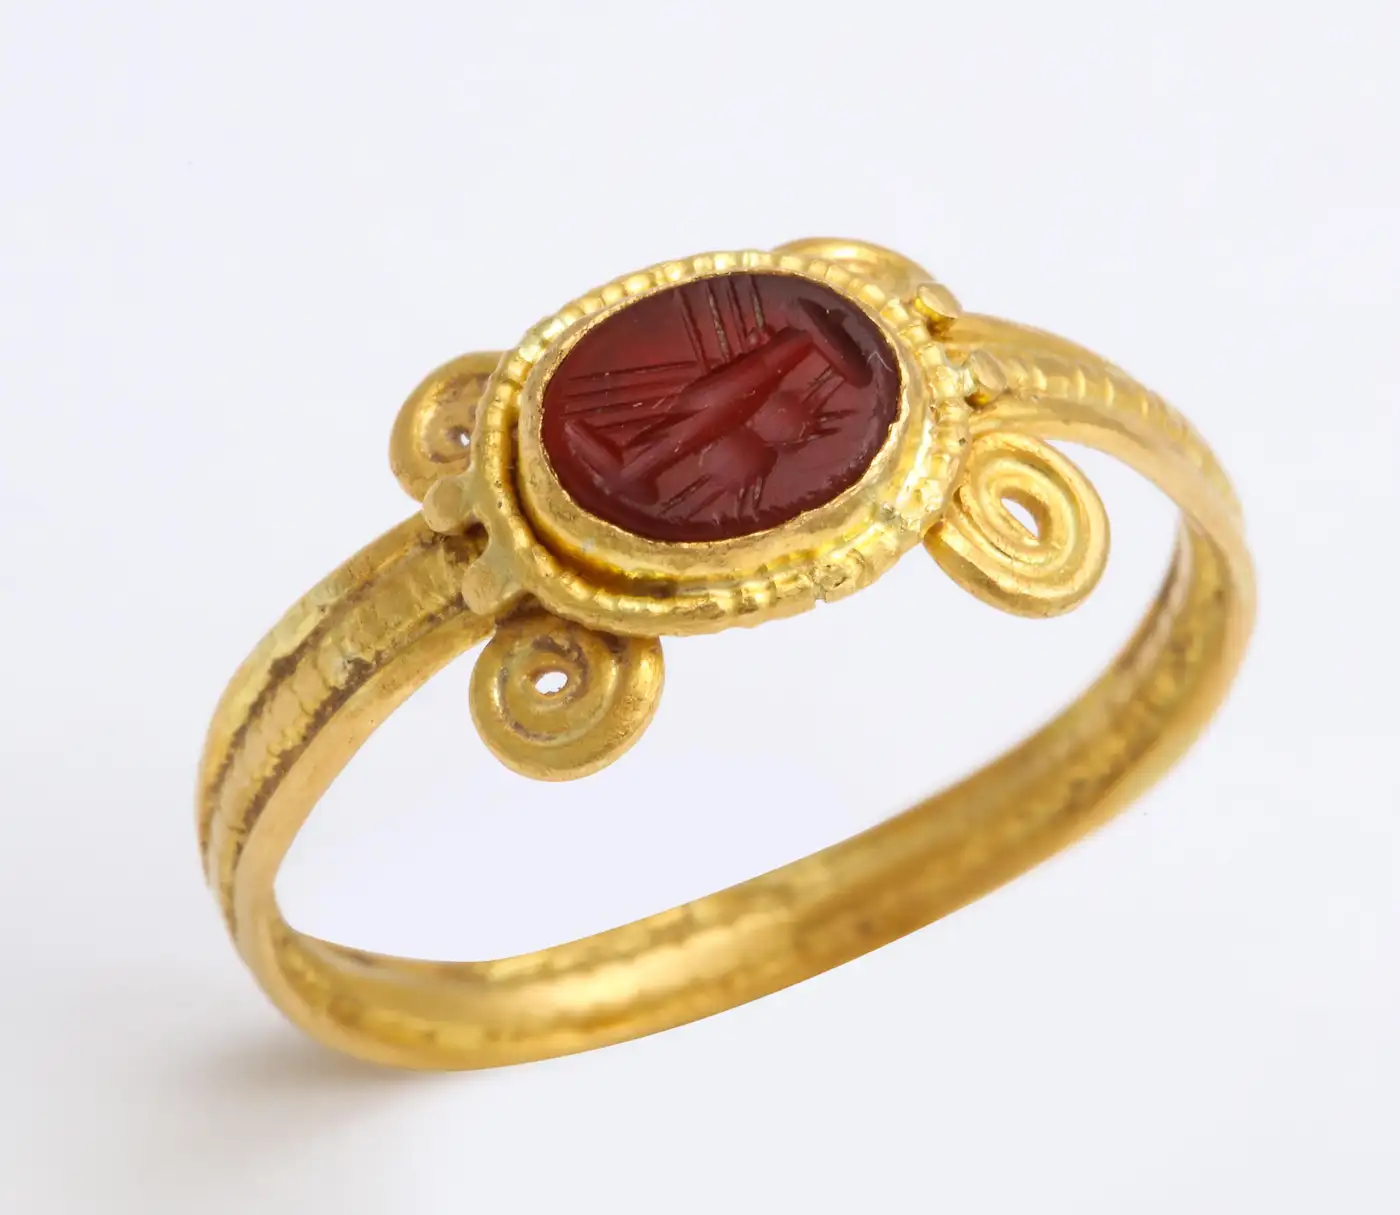 Ancient-Roman-Carnelian-Intaglio-Ring-with-Clasped-Hands-6.webp